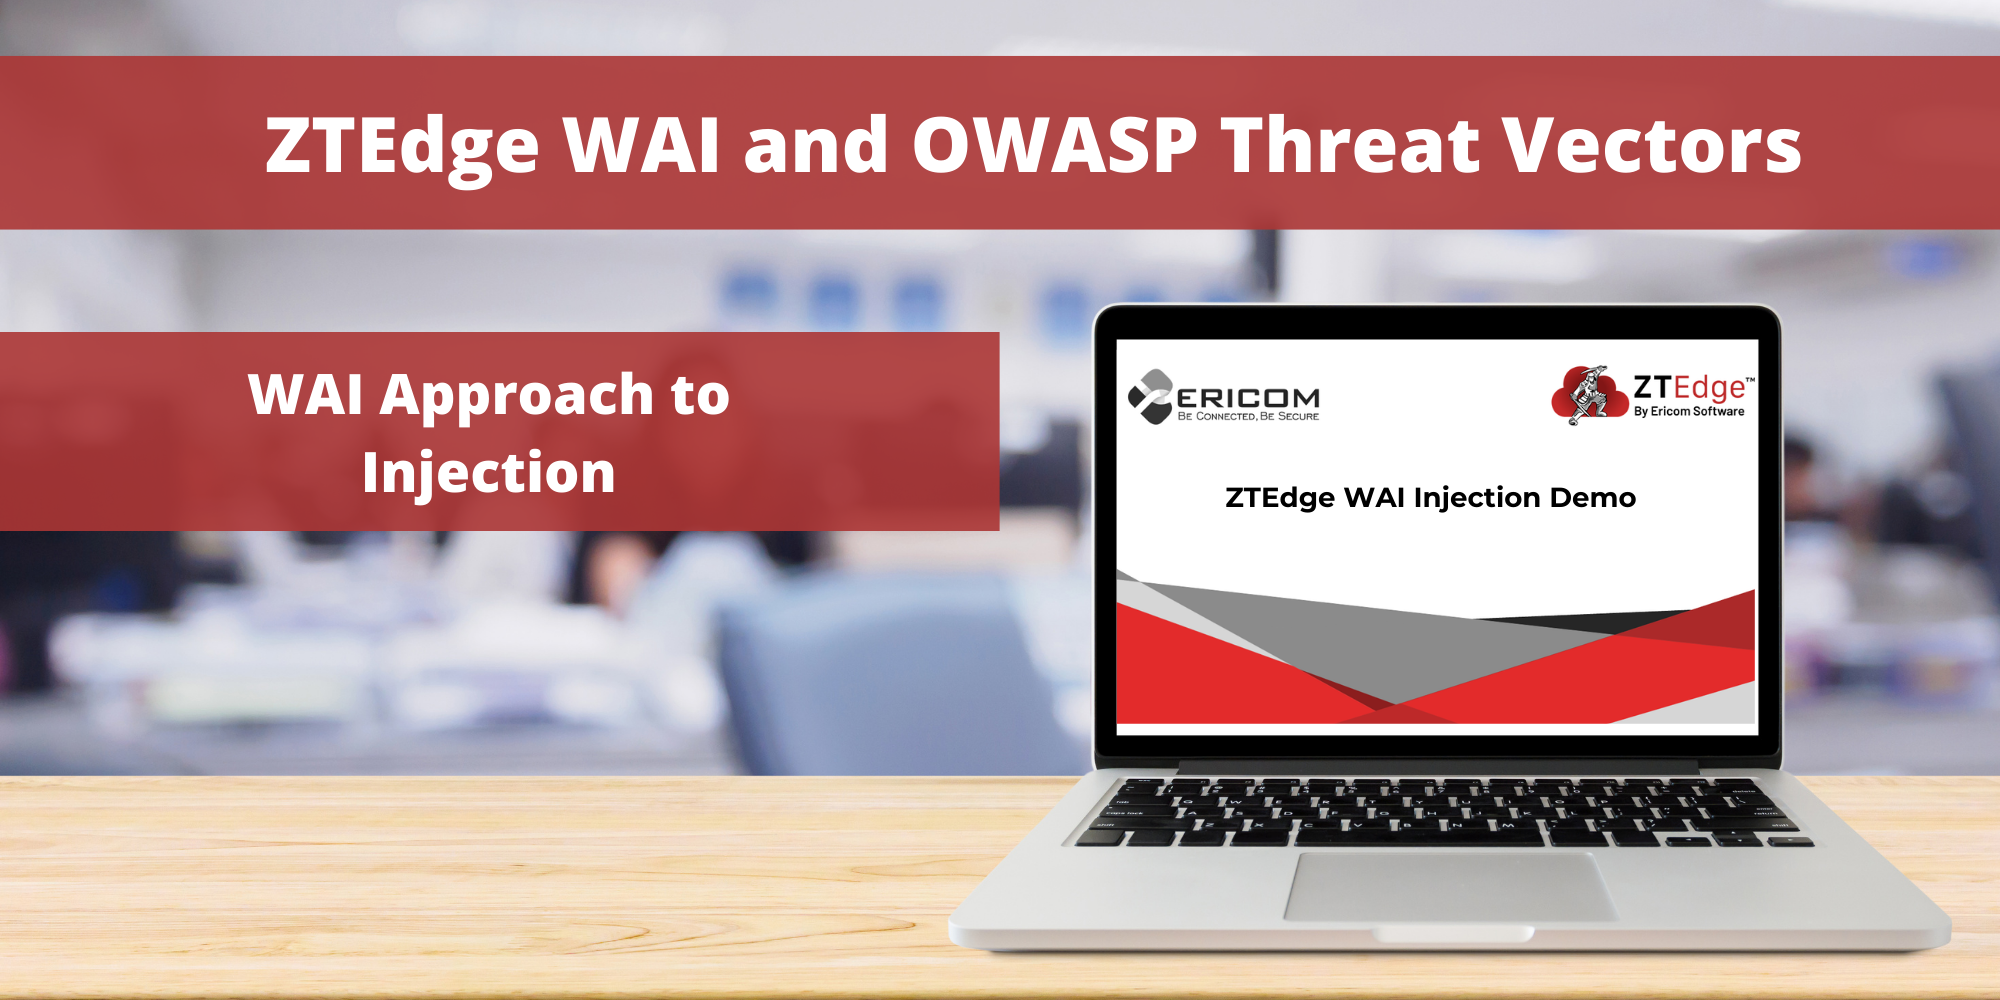 Addressing the OWASP Top 10 Application Security Risks with Web Application Isolation: #3 Injection featured image